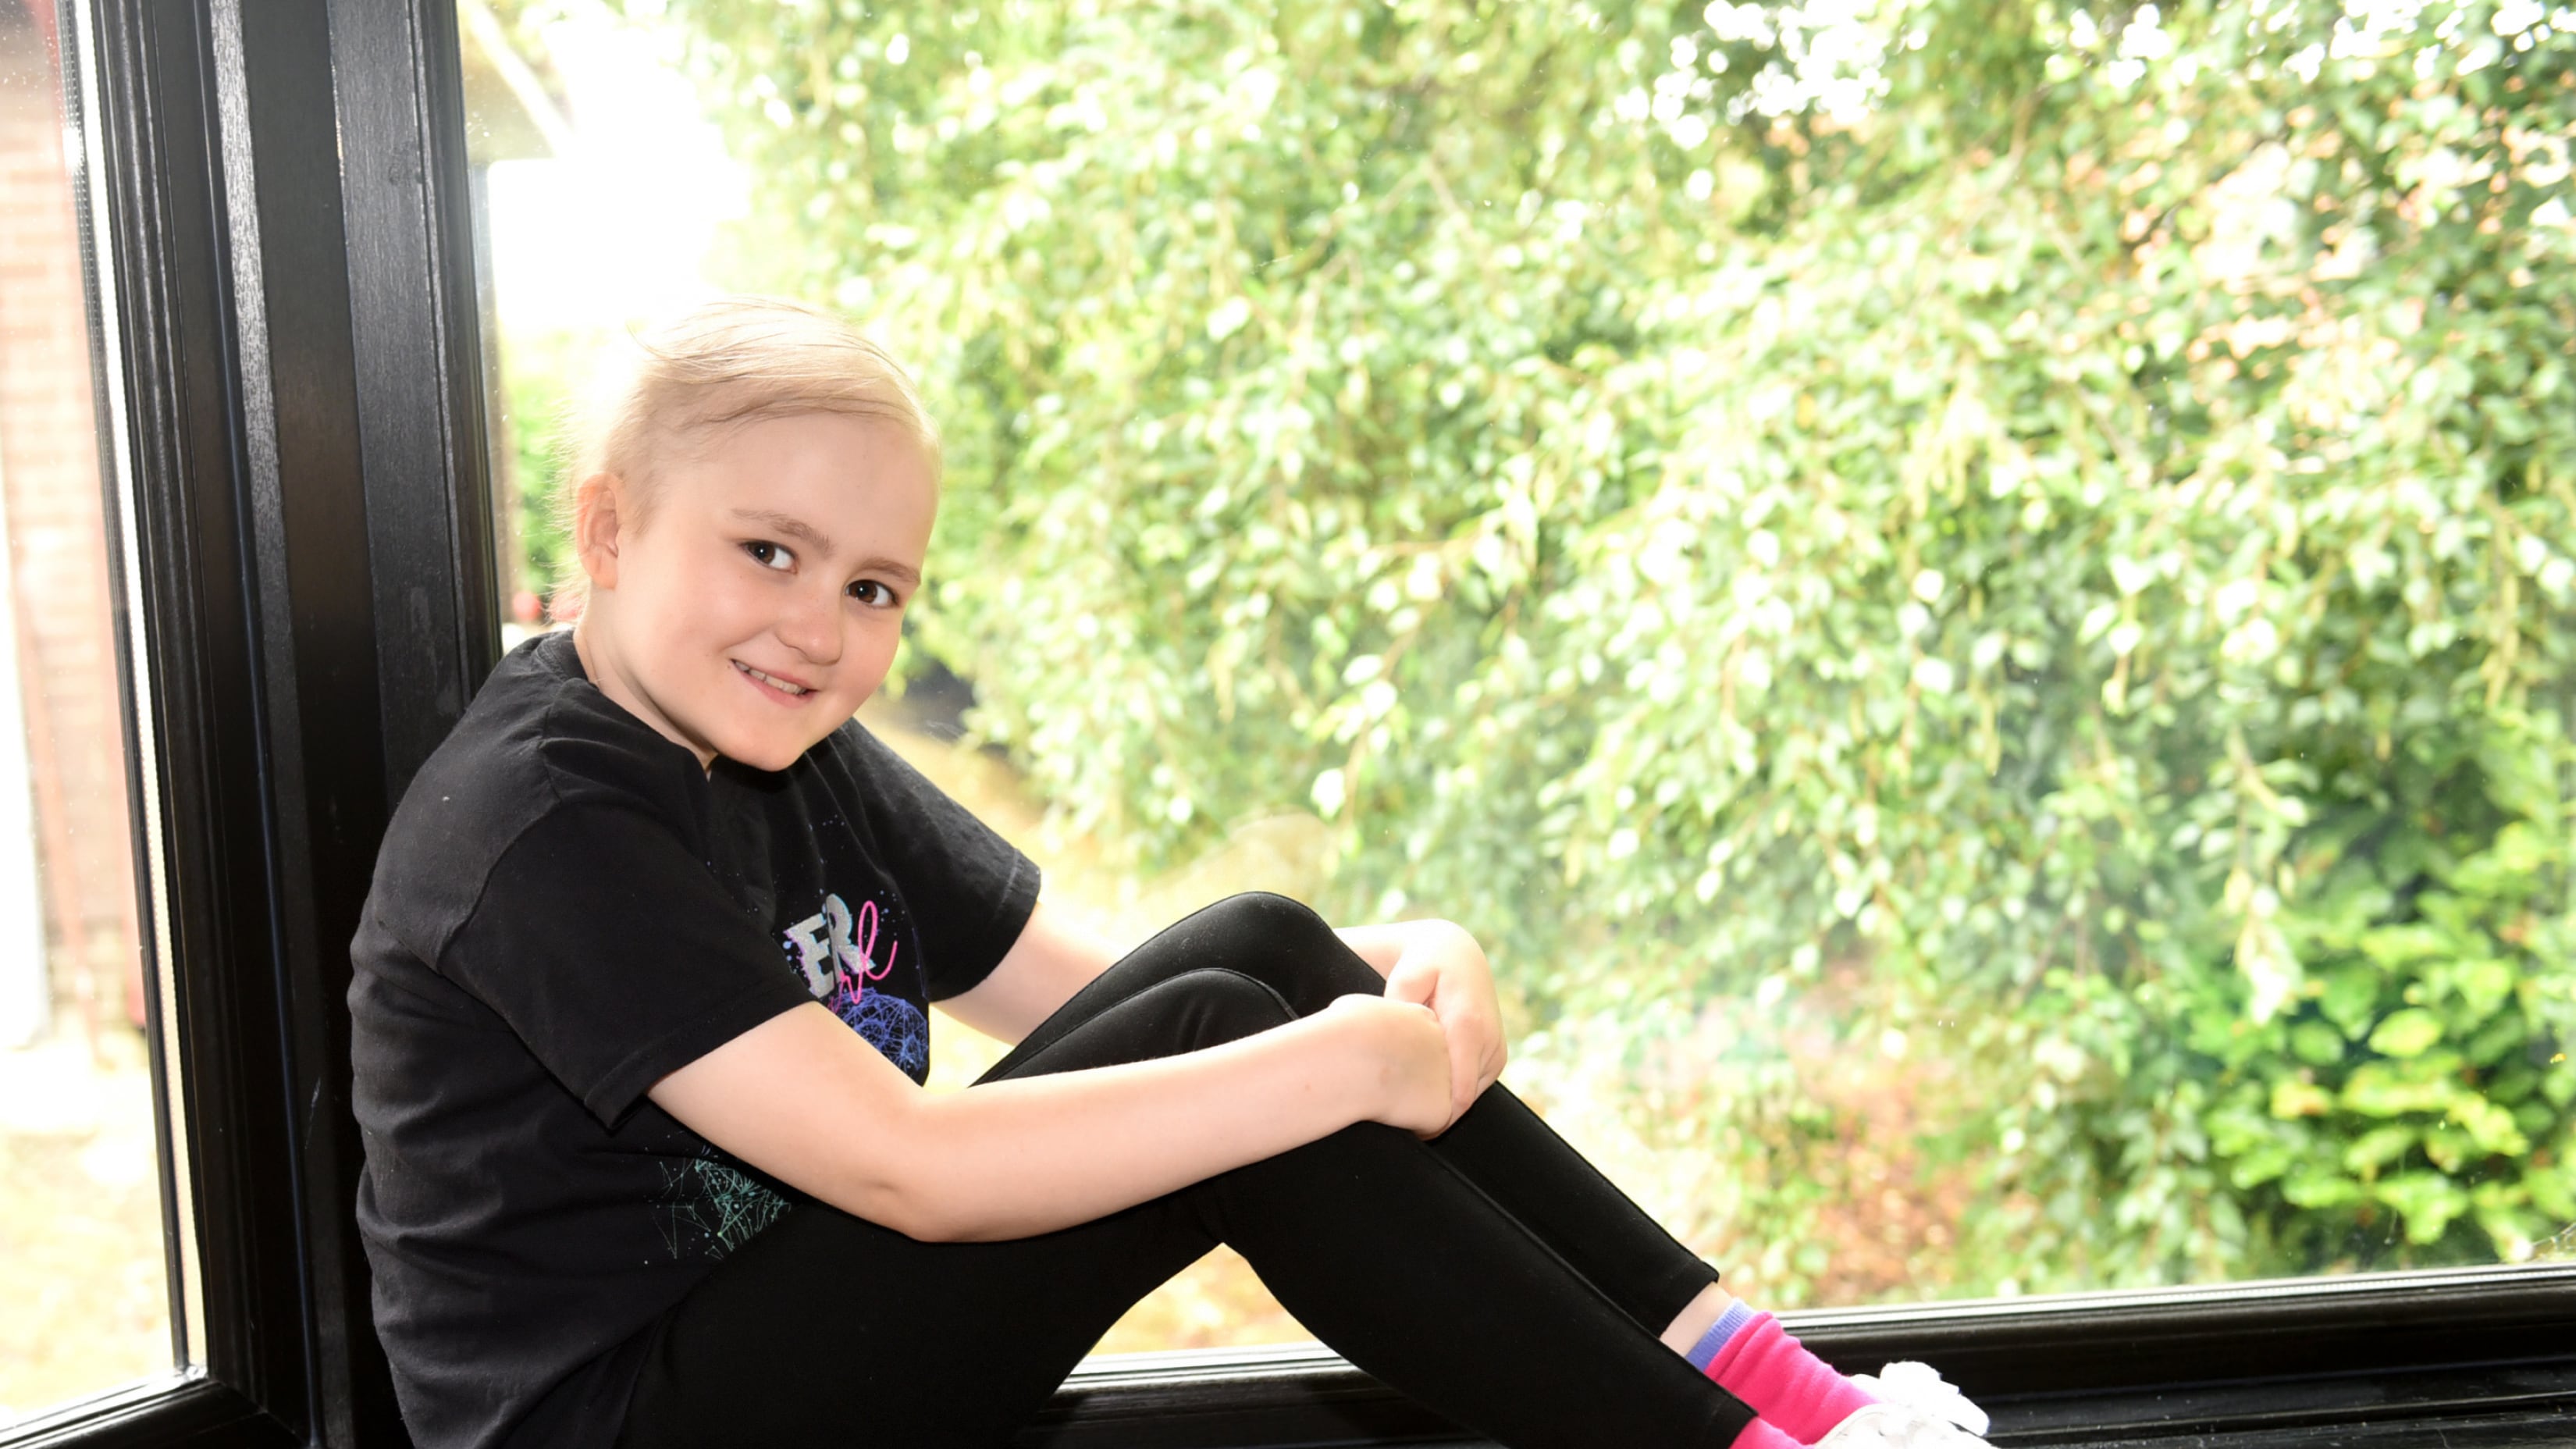 Lucy McGeehan, from Castleferg, died on Saturday at the age of 11. PICTURE: BONE CANCER RESEARCH TRUST